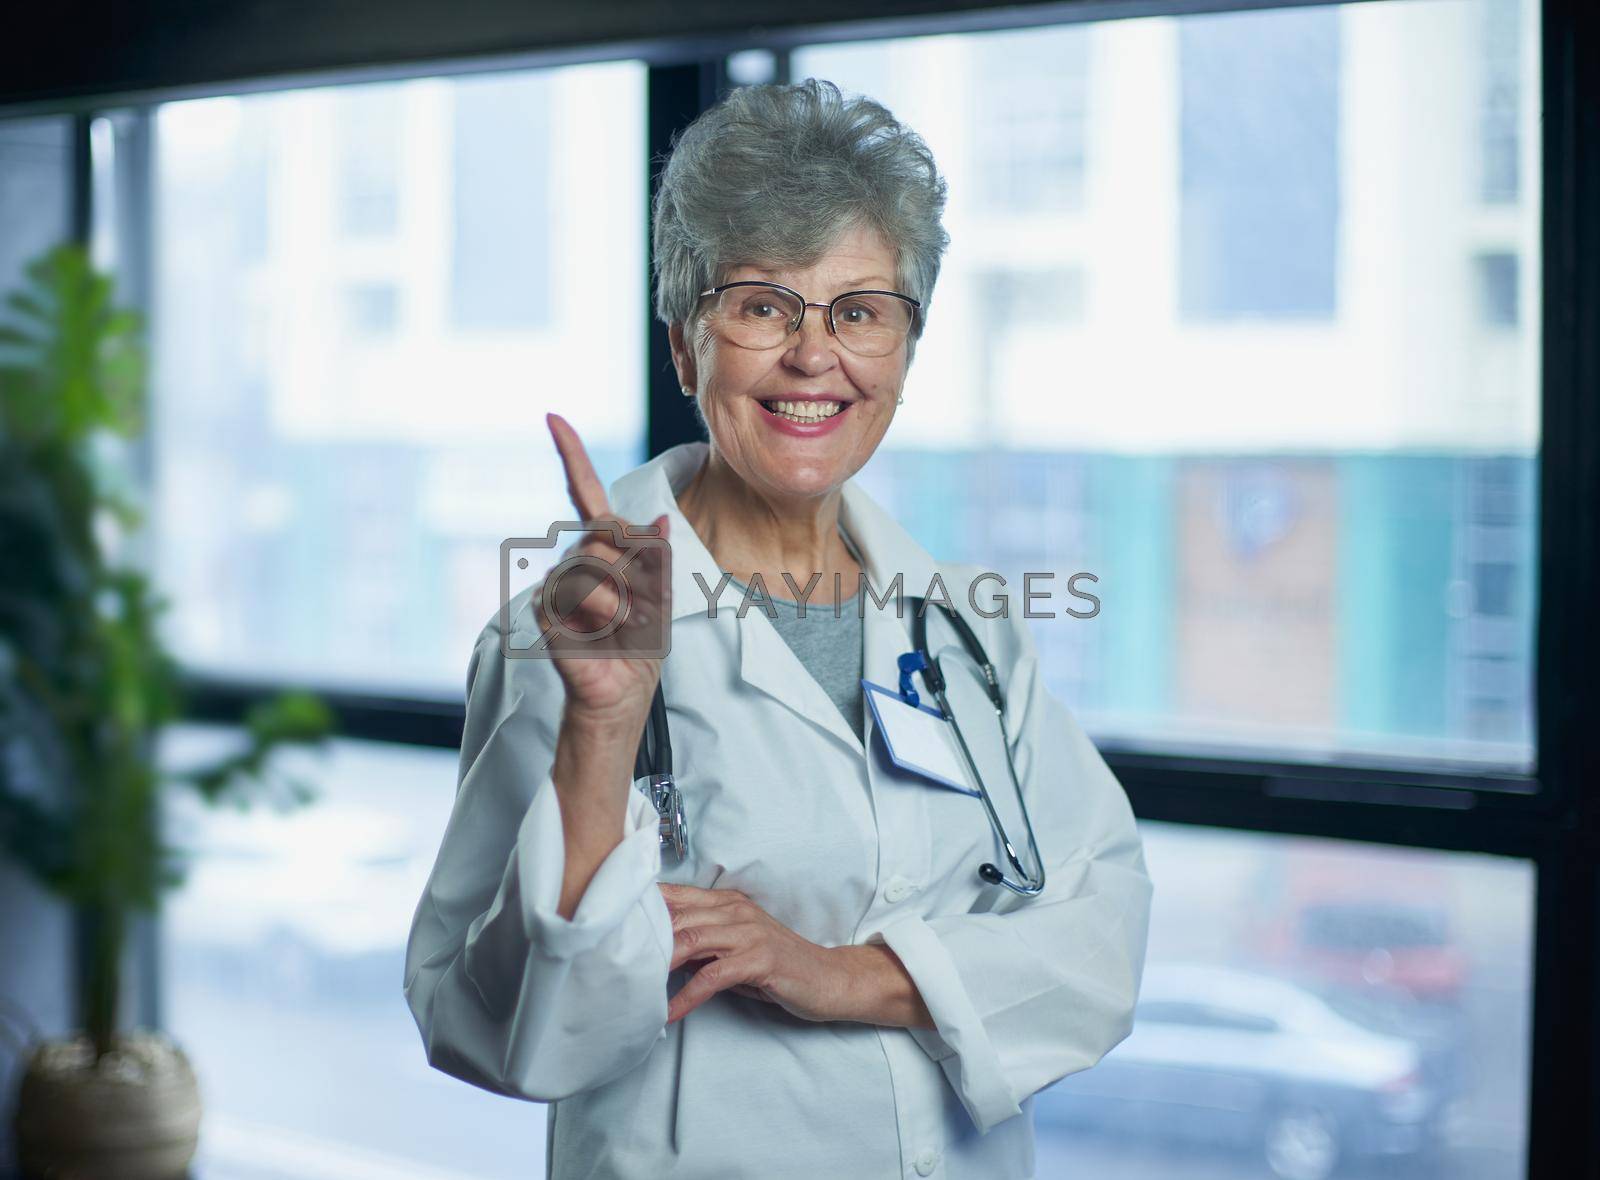 Royalty free image of Senior female doctor smiling in hospital by asdf